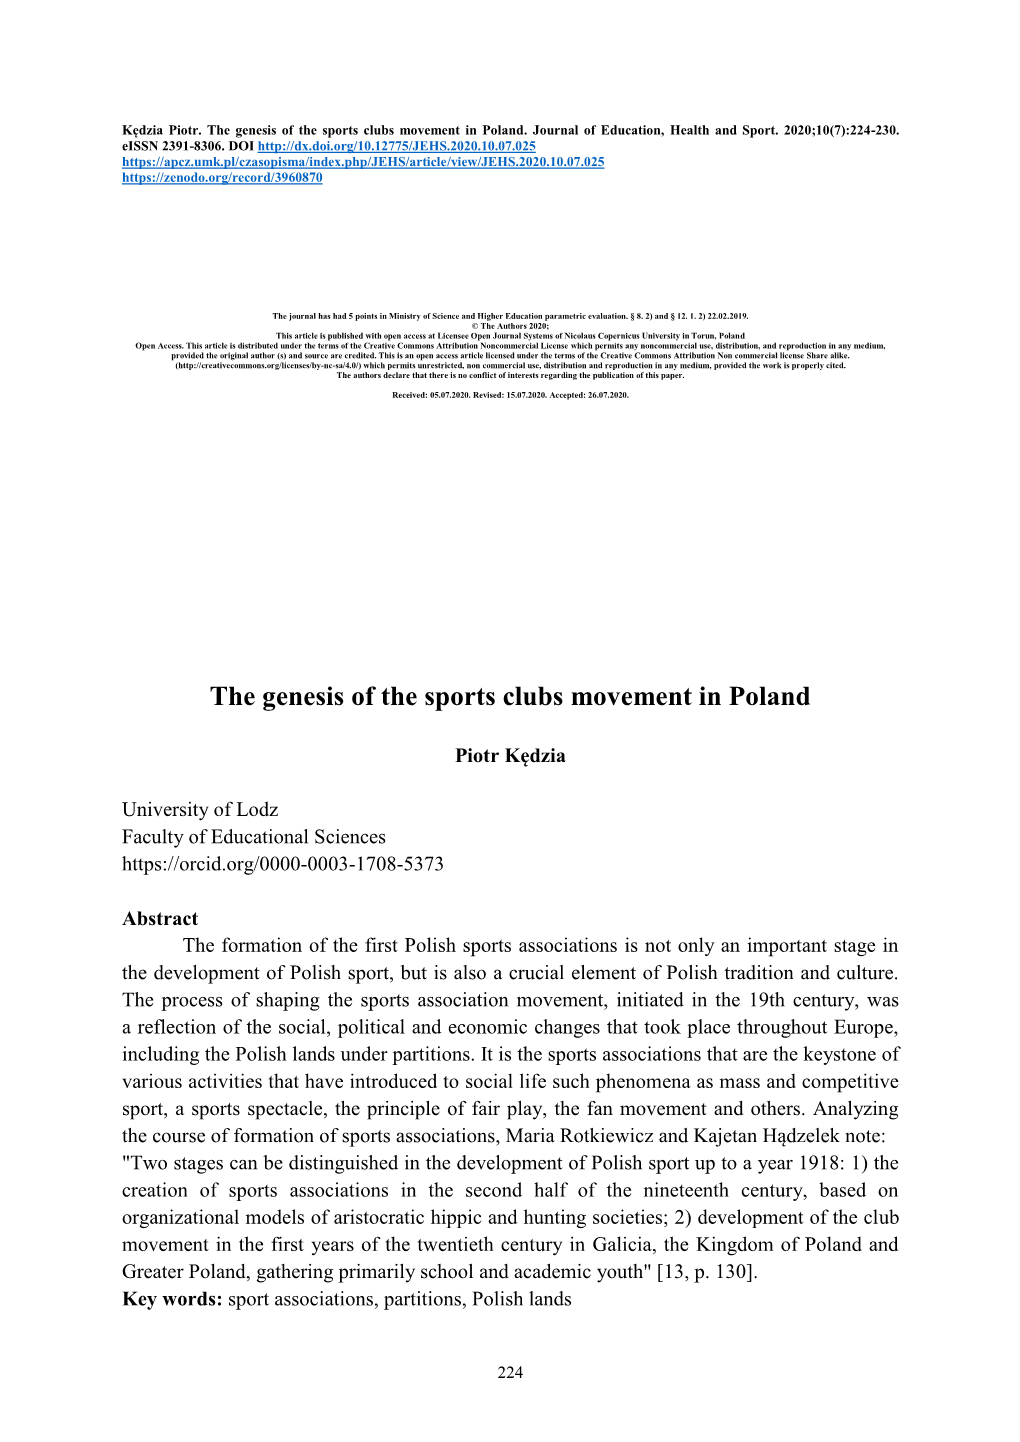 The Genesis of the Sports Clubs Movement in Poland